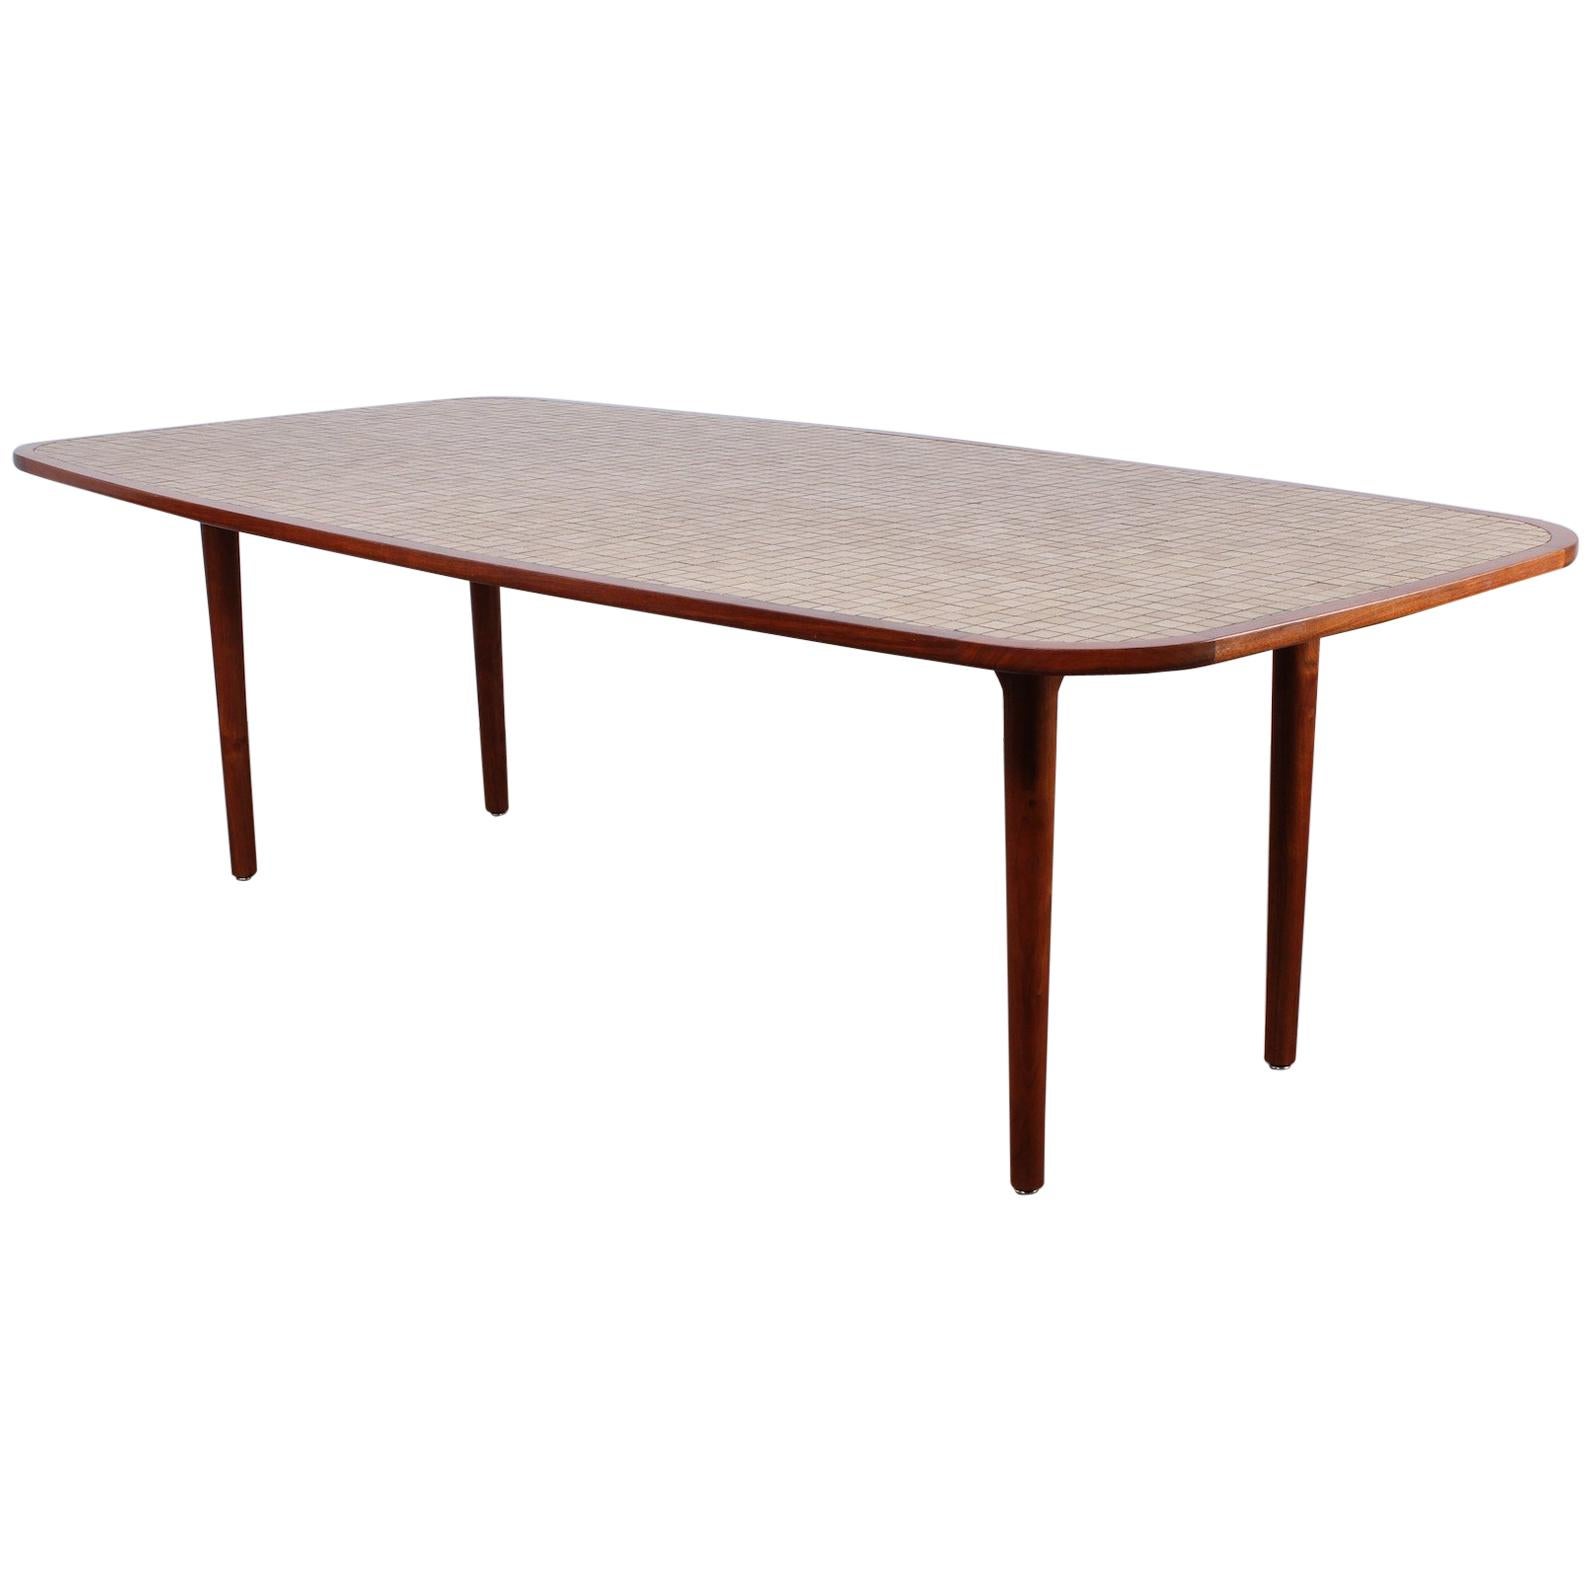 Tile-Top Dining Table by Gordon and Jane Martz